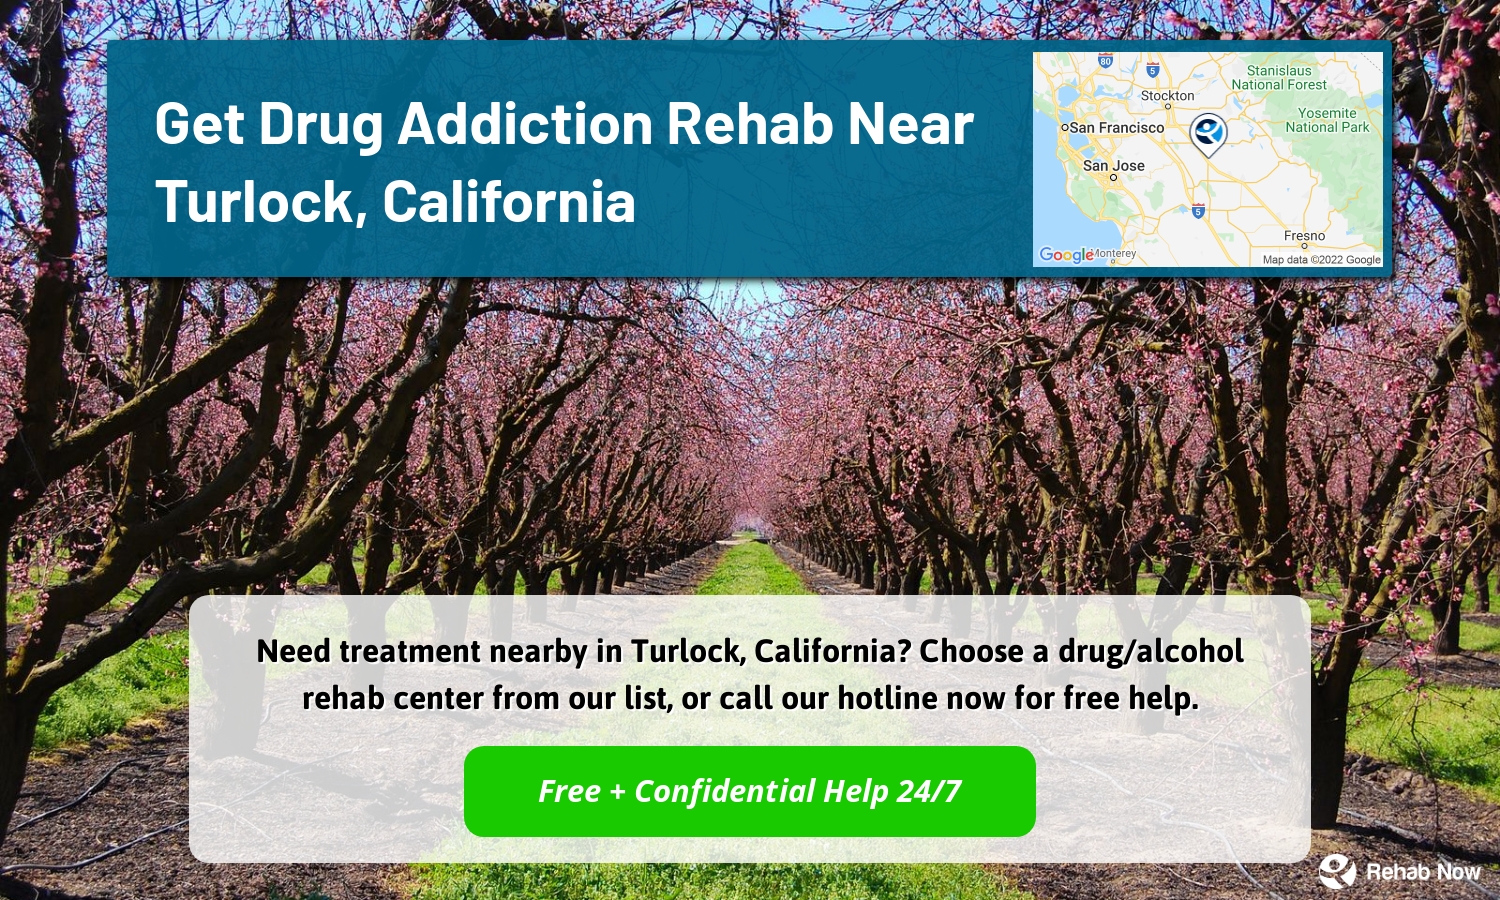 Need treatment nearby in Turlock, California? Choose a drug/alcohol rehab center from our list, or call our hotline now for free help.